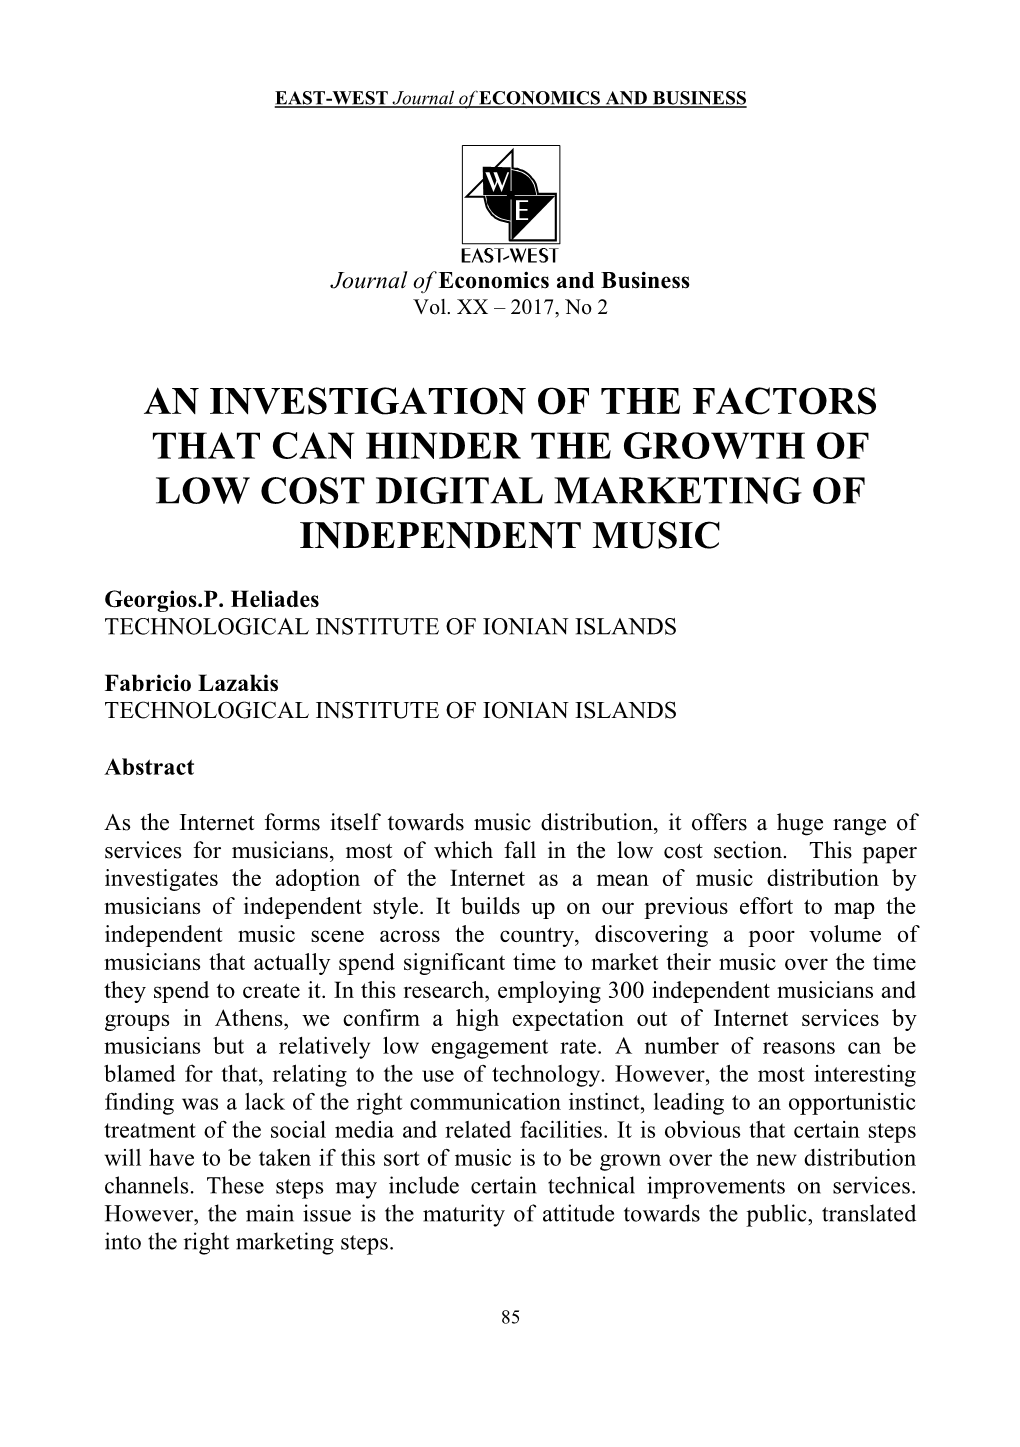 An Investigation of the Factors That Can Hinder the Growth of Low Cost Digital Marketing of Independent Music